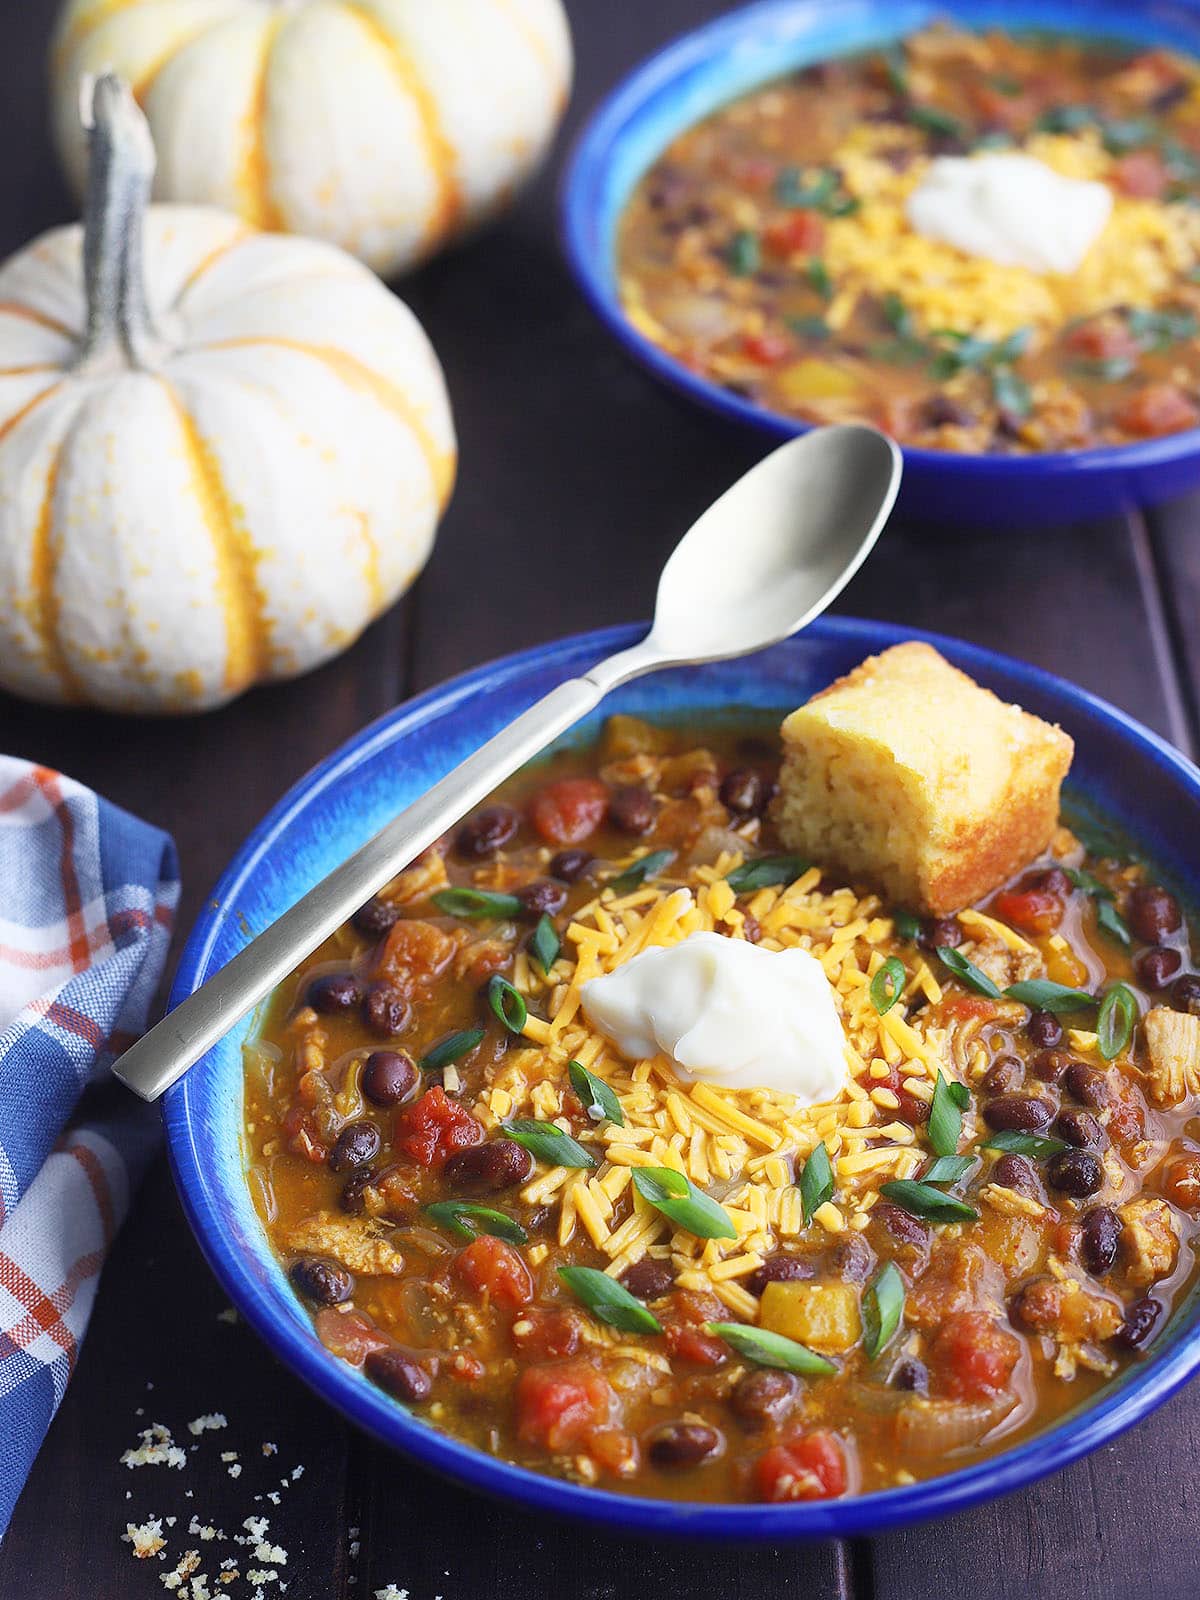 Easy turkey pumpkin black bean chili is perfect for fall! Black beans and Rotel tomatoes give it a Southwestern kick, making this chili recipe a rich and tasty cold weather meal.